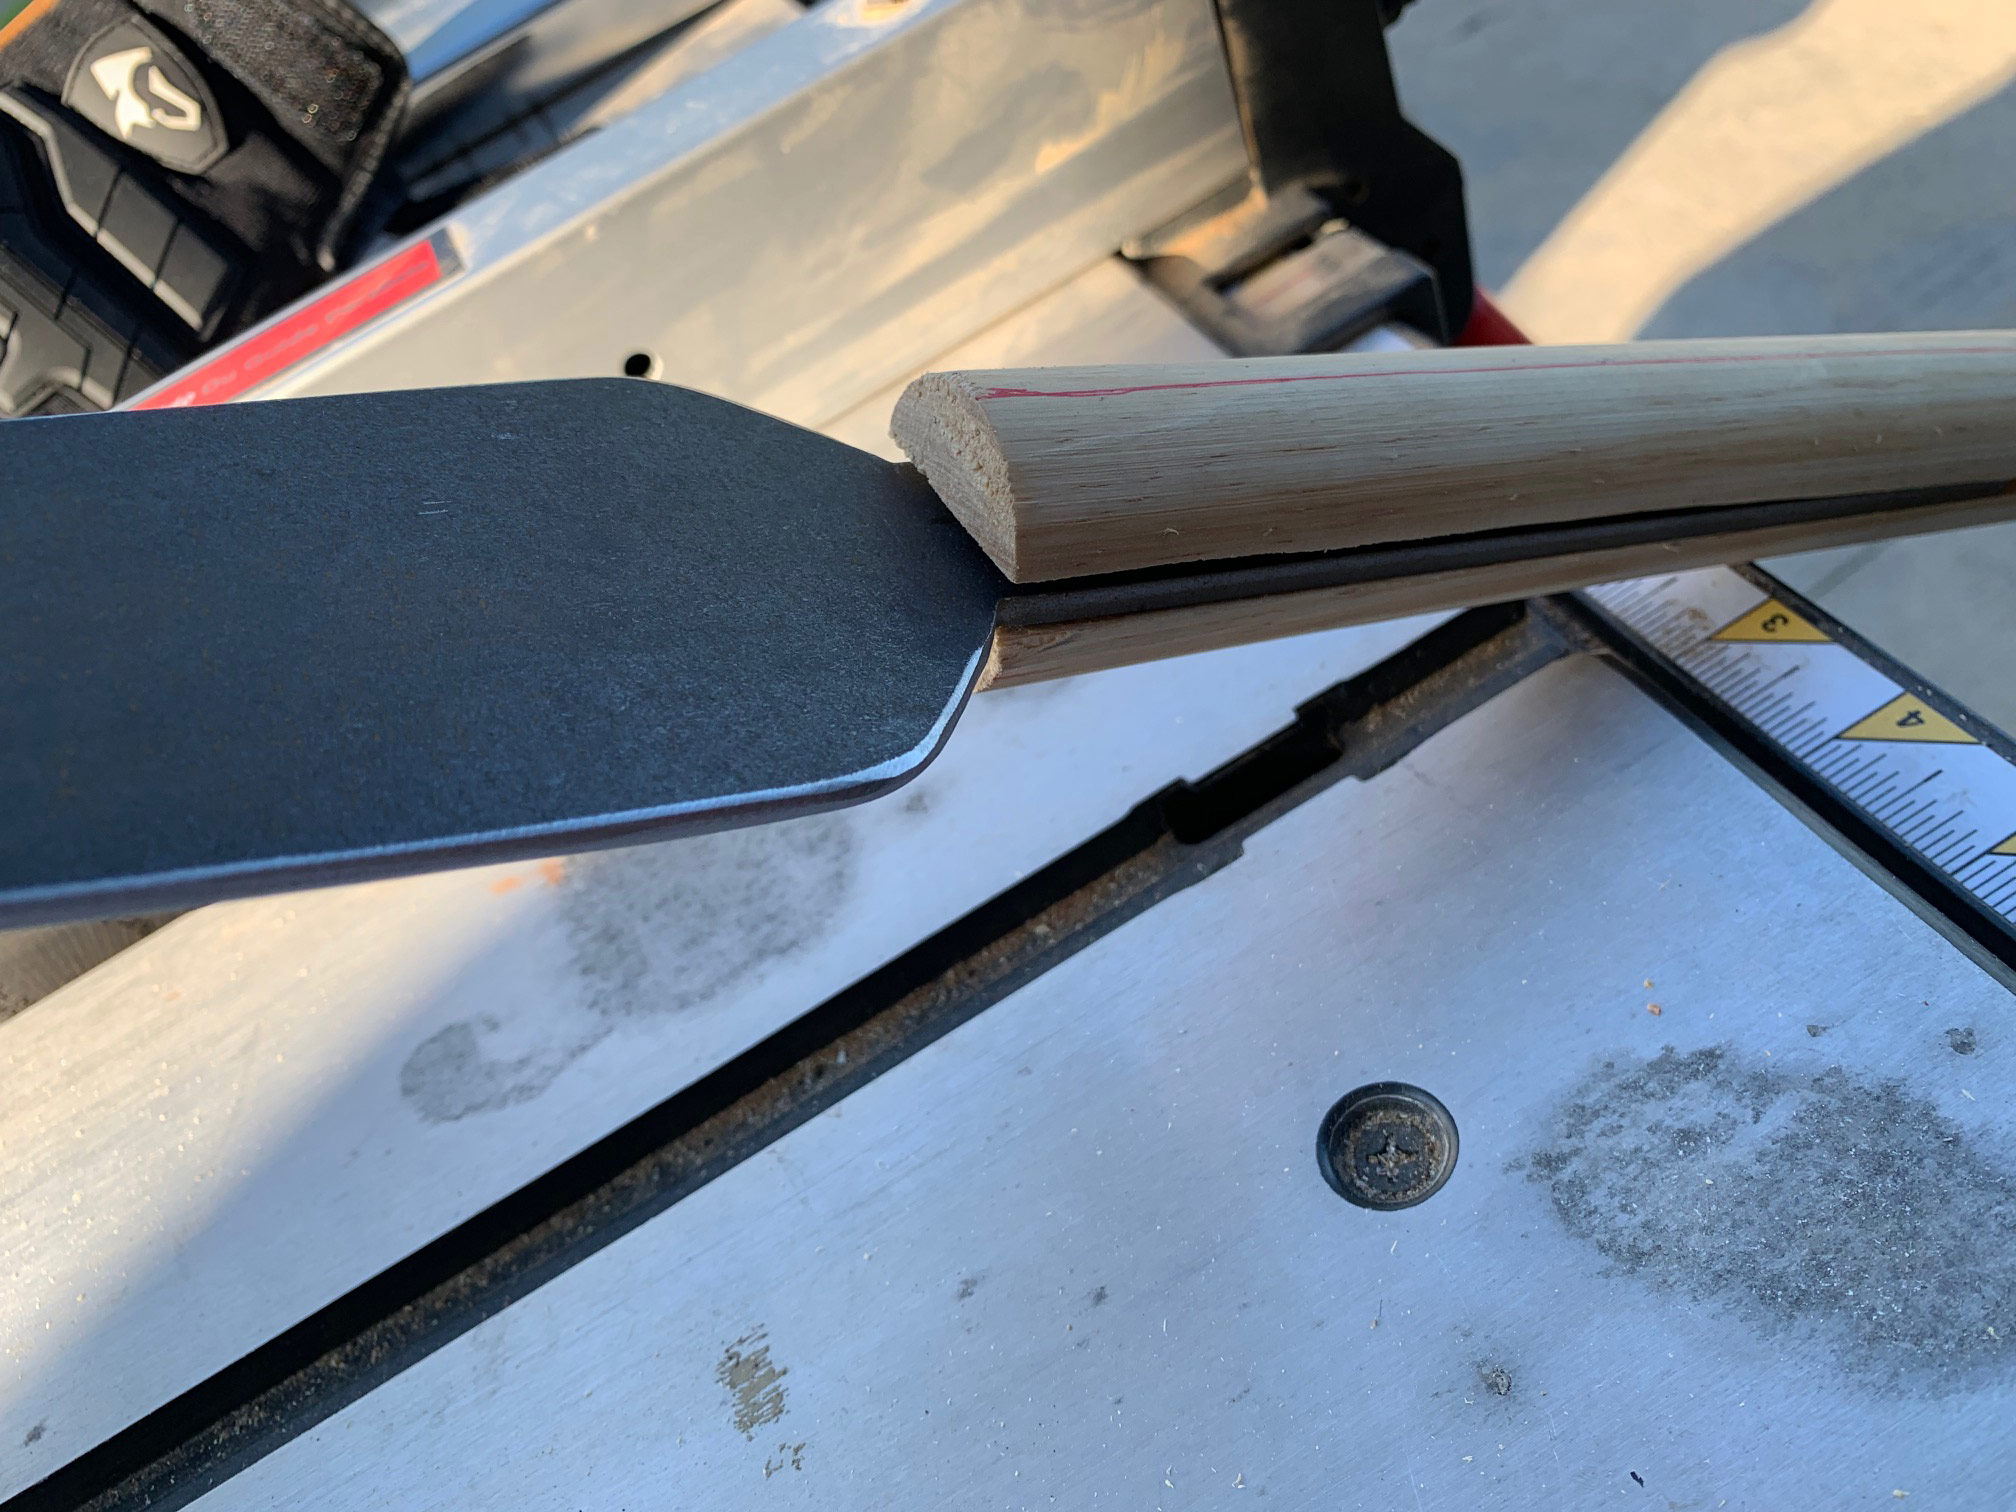 spearhead test fit into the wood handle